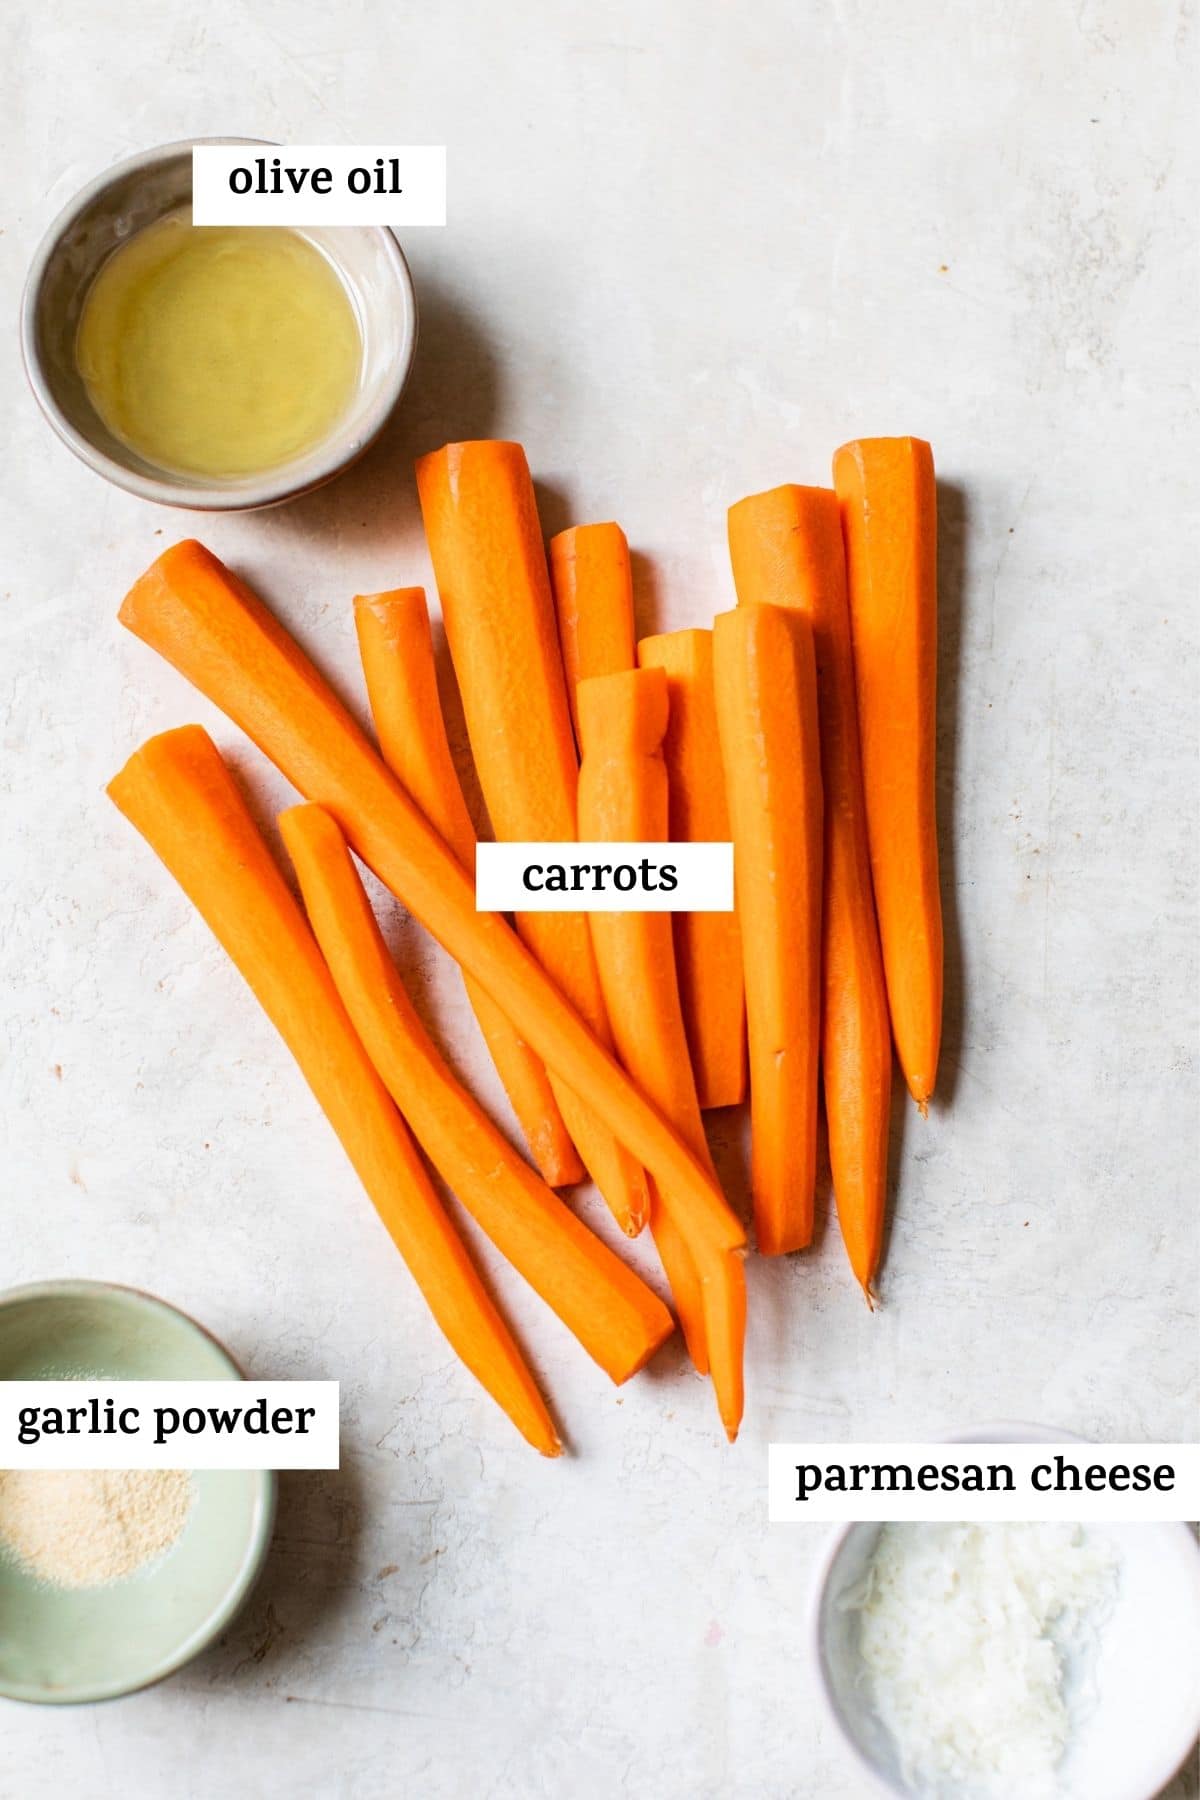 carrots, oil, cheese, and garlic powder with text overlay